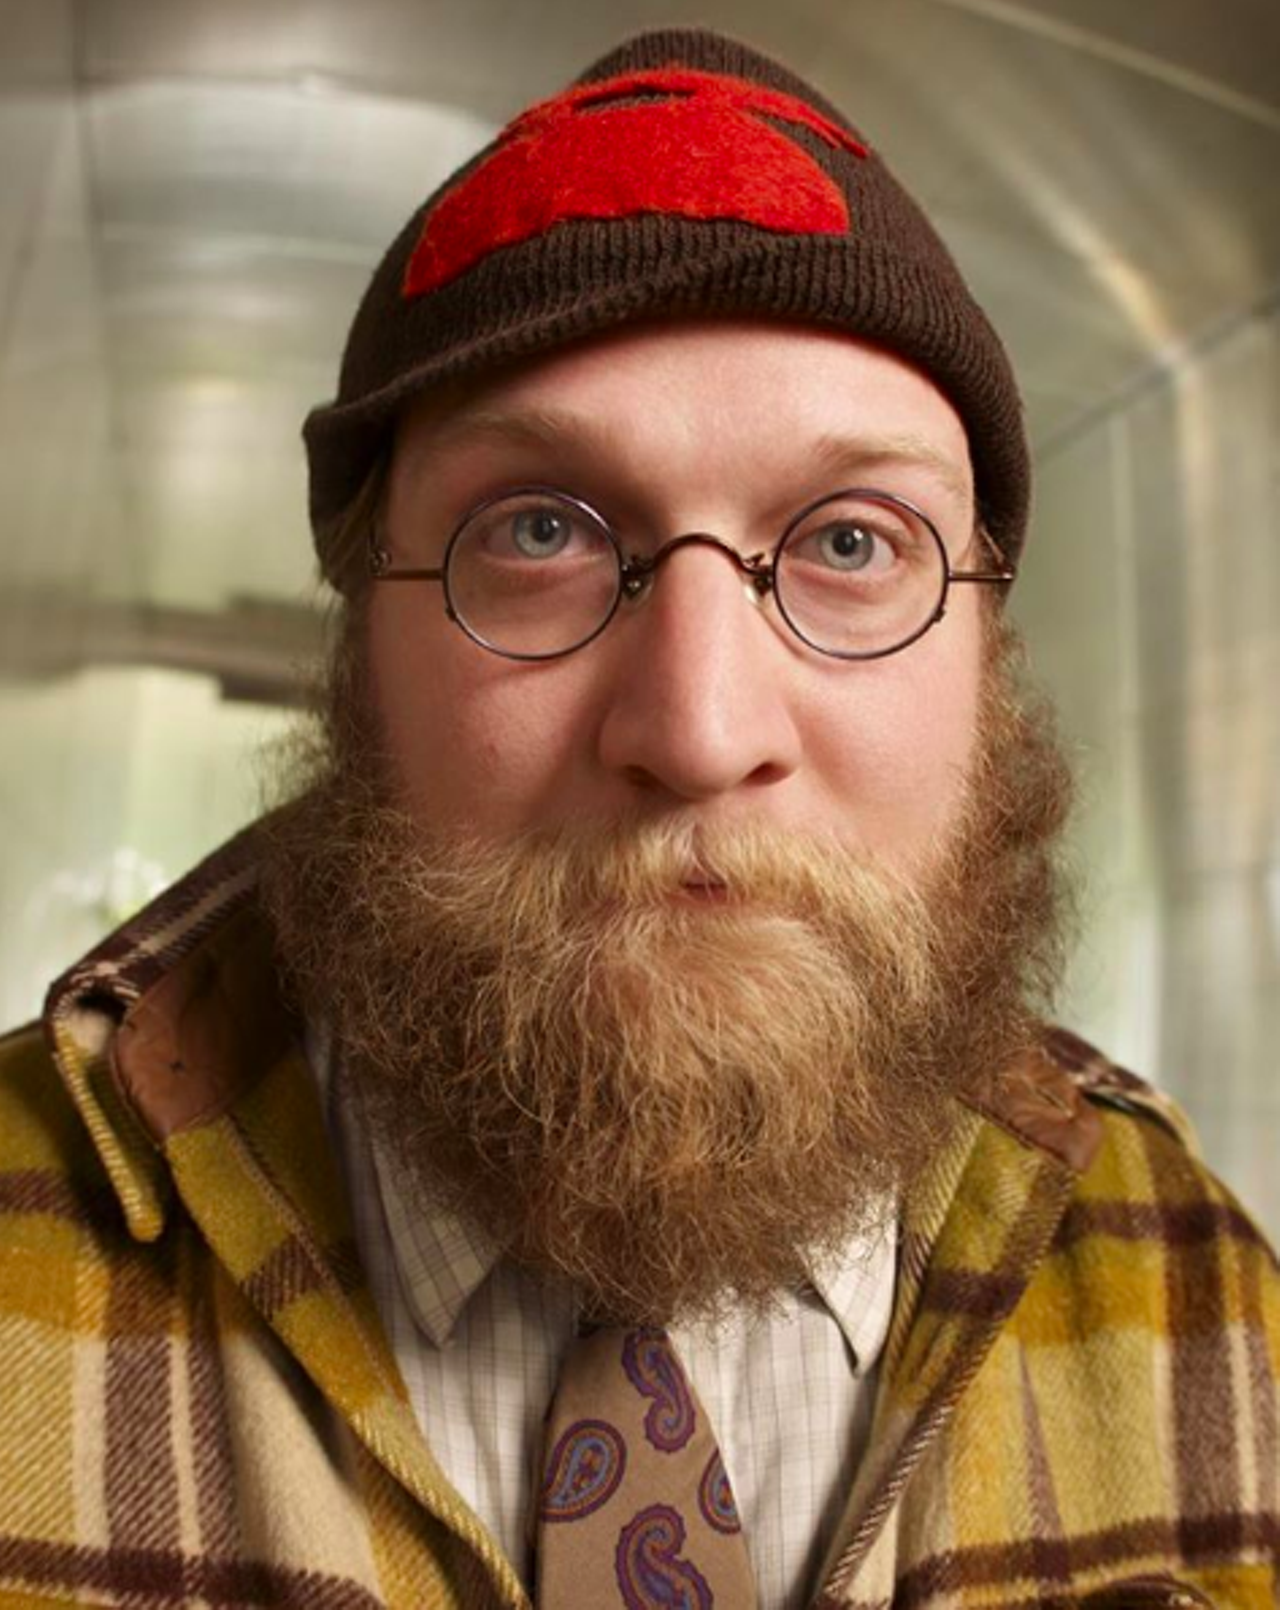 Pendleton Ward
Animator, writer and voice actor Pendleton Ward, best known as the creative force behind Adventure Time, was born in the Alamo City in 1982. Though he now resides in Los Angeles, the cartoon wiz is a graduate of the now-LEE High School.
Photo via Instagram / weeb.on.crack